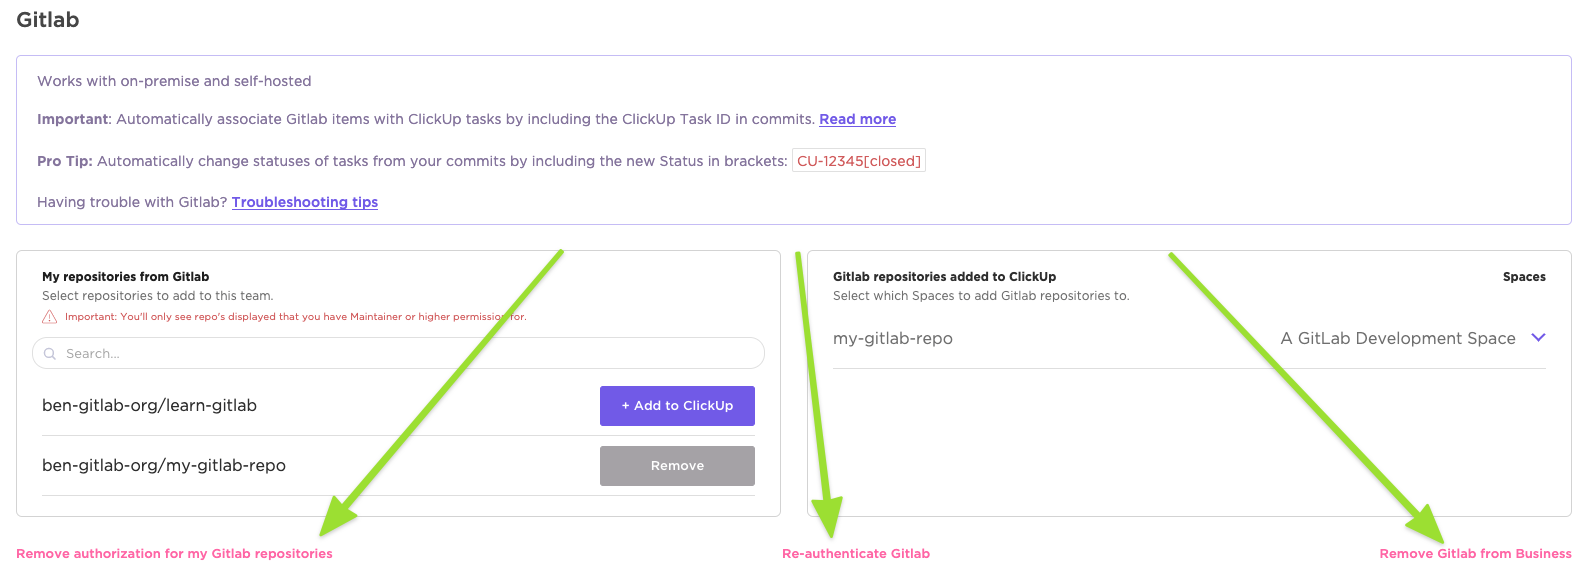 Screenshot of the 'Remove authorization for my Gitlab repositories', 'Reauthenticate Gitlab', and 'Remove Gitlab from Workspace' options in ClickUp.